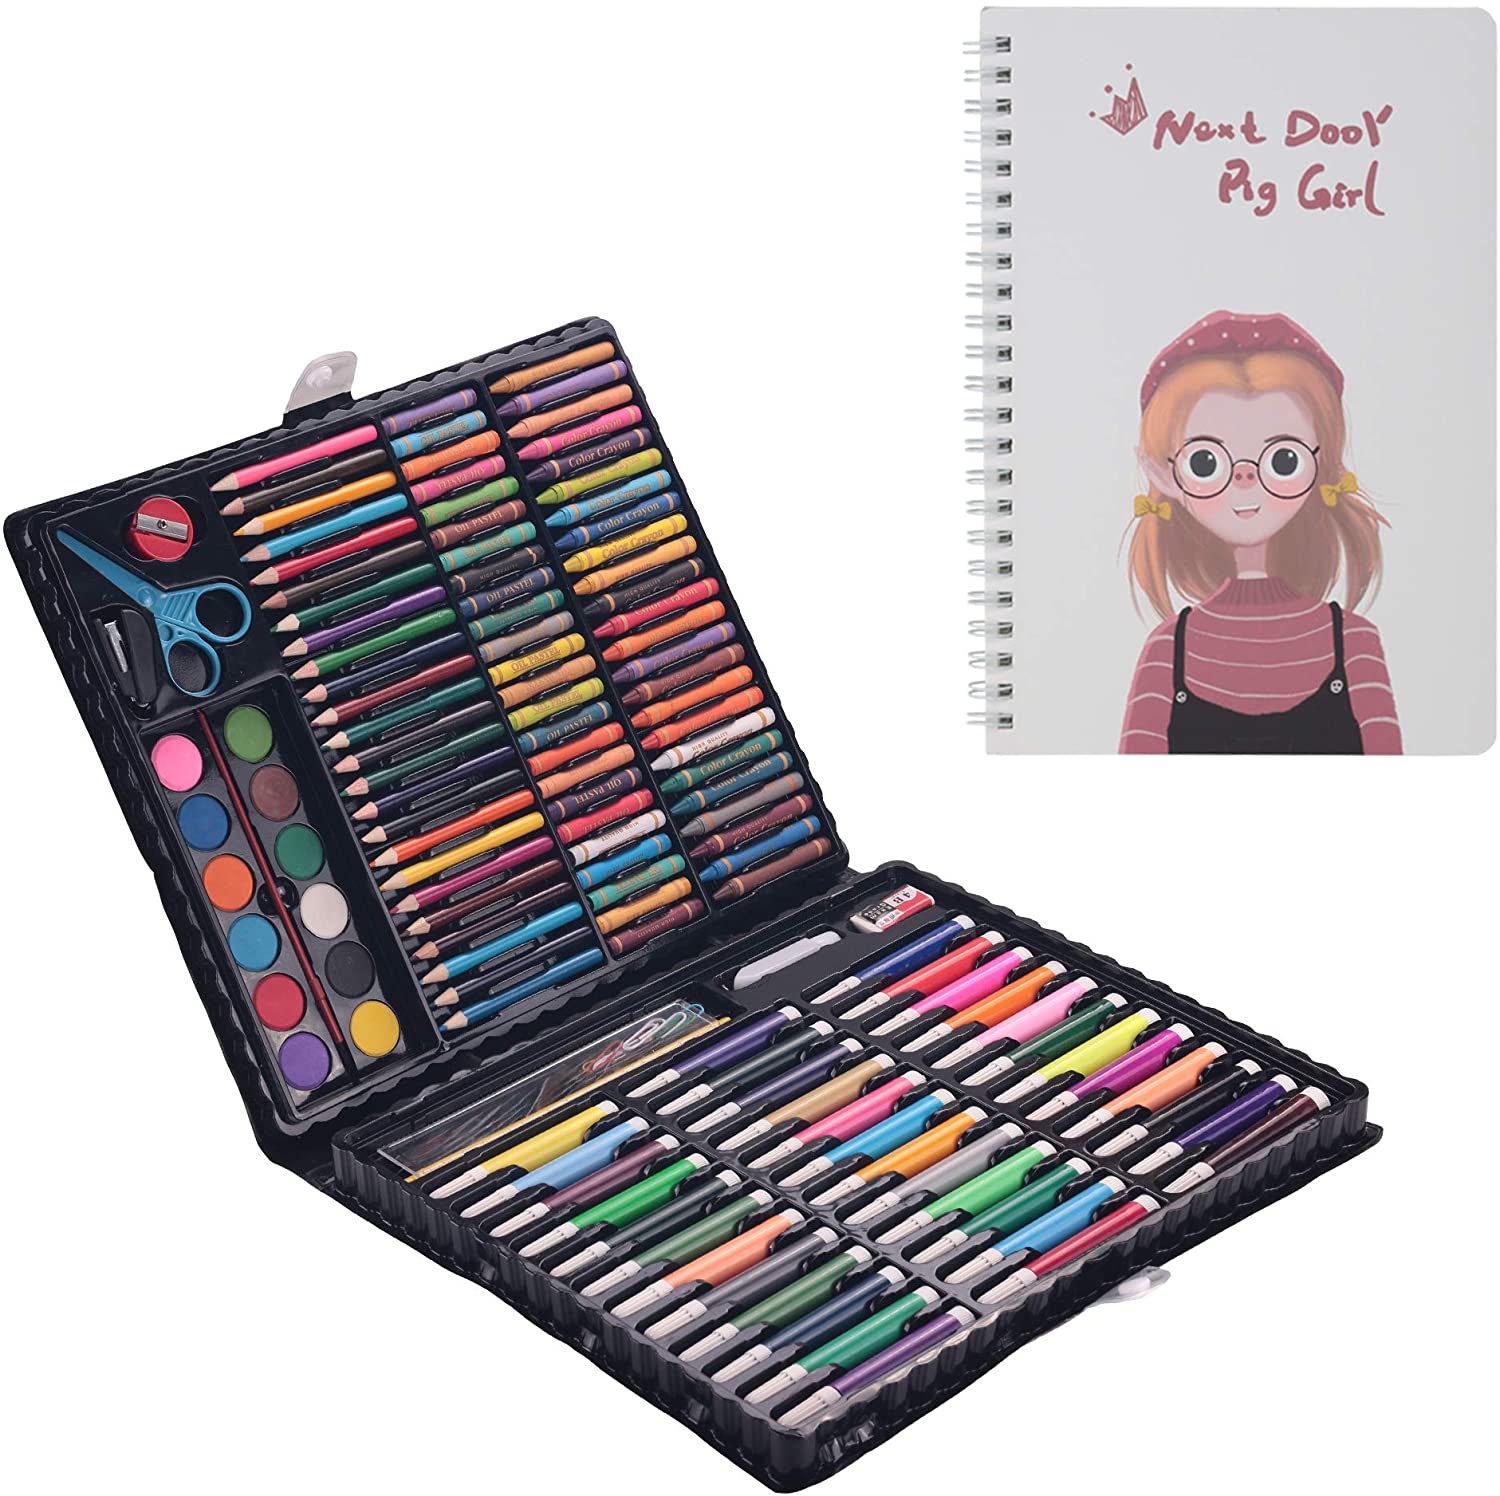 Pencils Art Set Painting Set Watercolor Pencil Crayon Water Pen Drawing  Board Doodle Supplies Kids Educational Toys Gift 2211087431917 From Mg1d,  $41.48